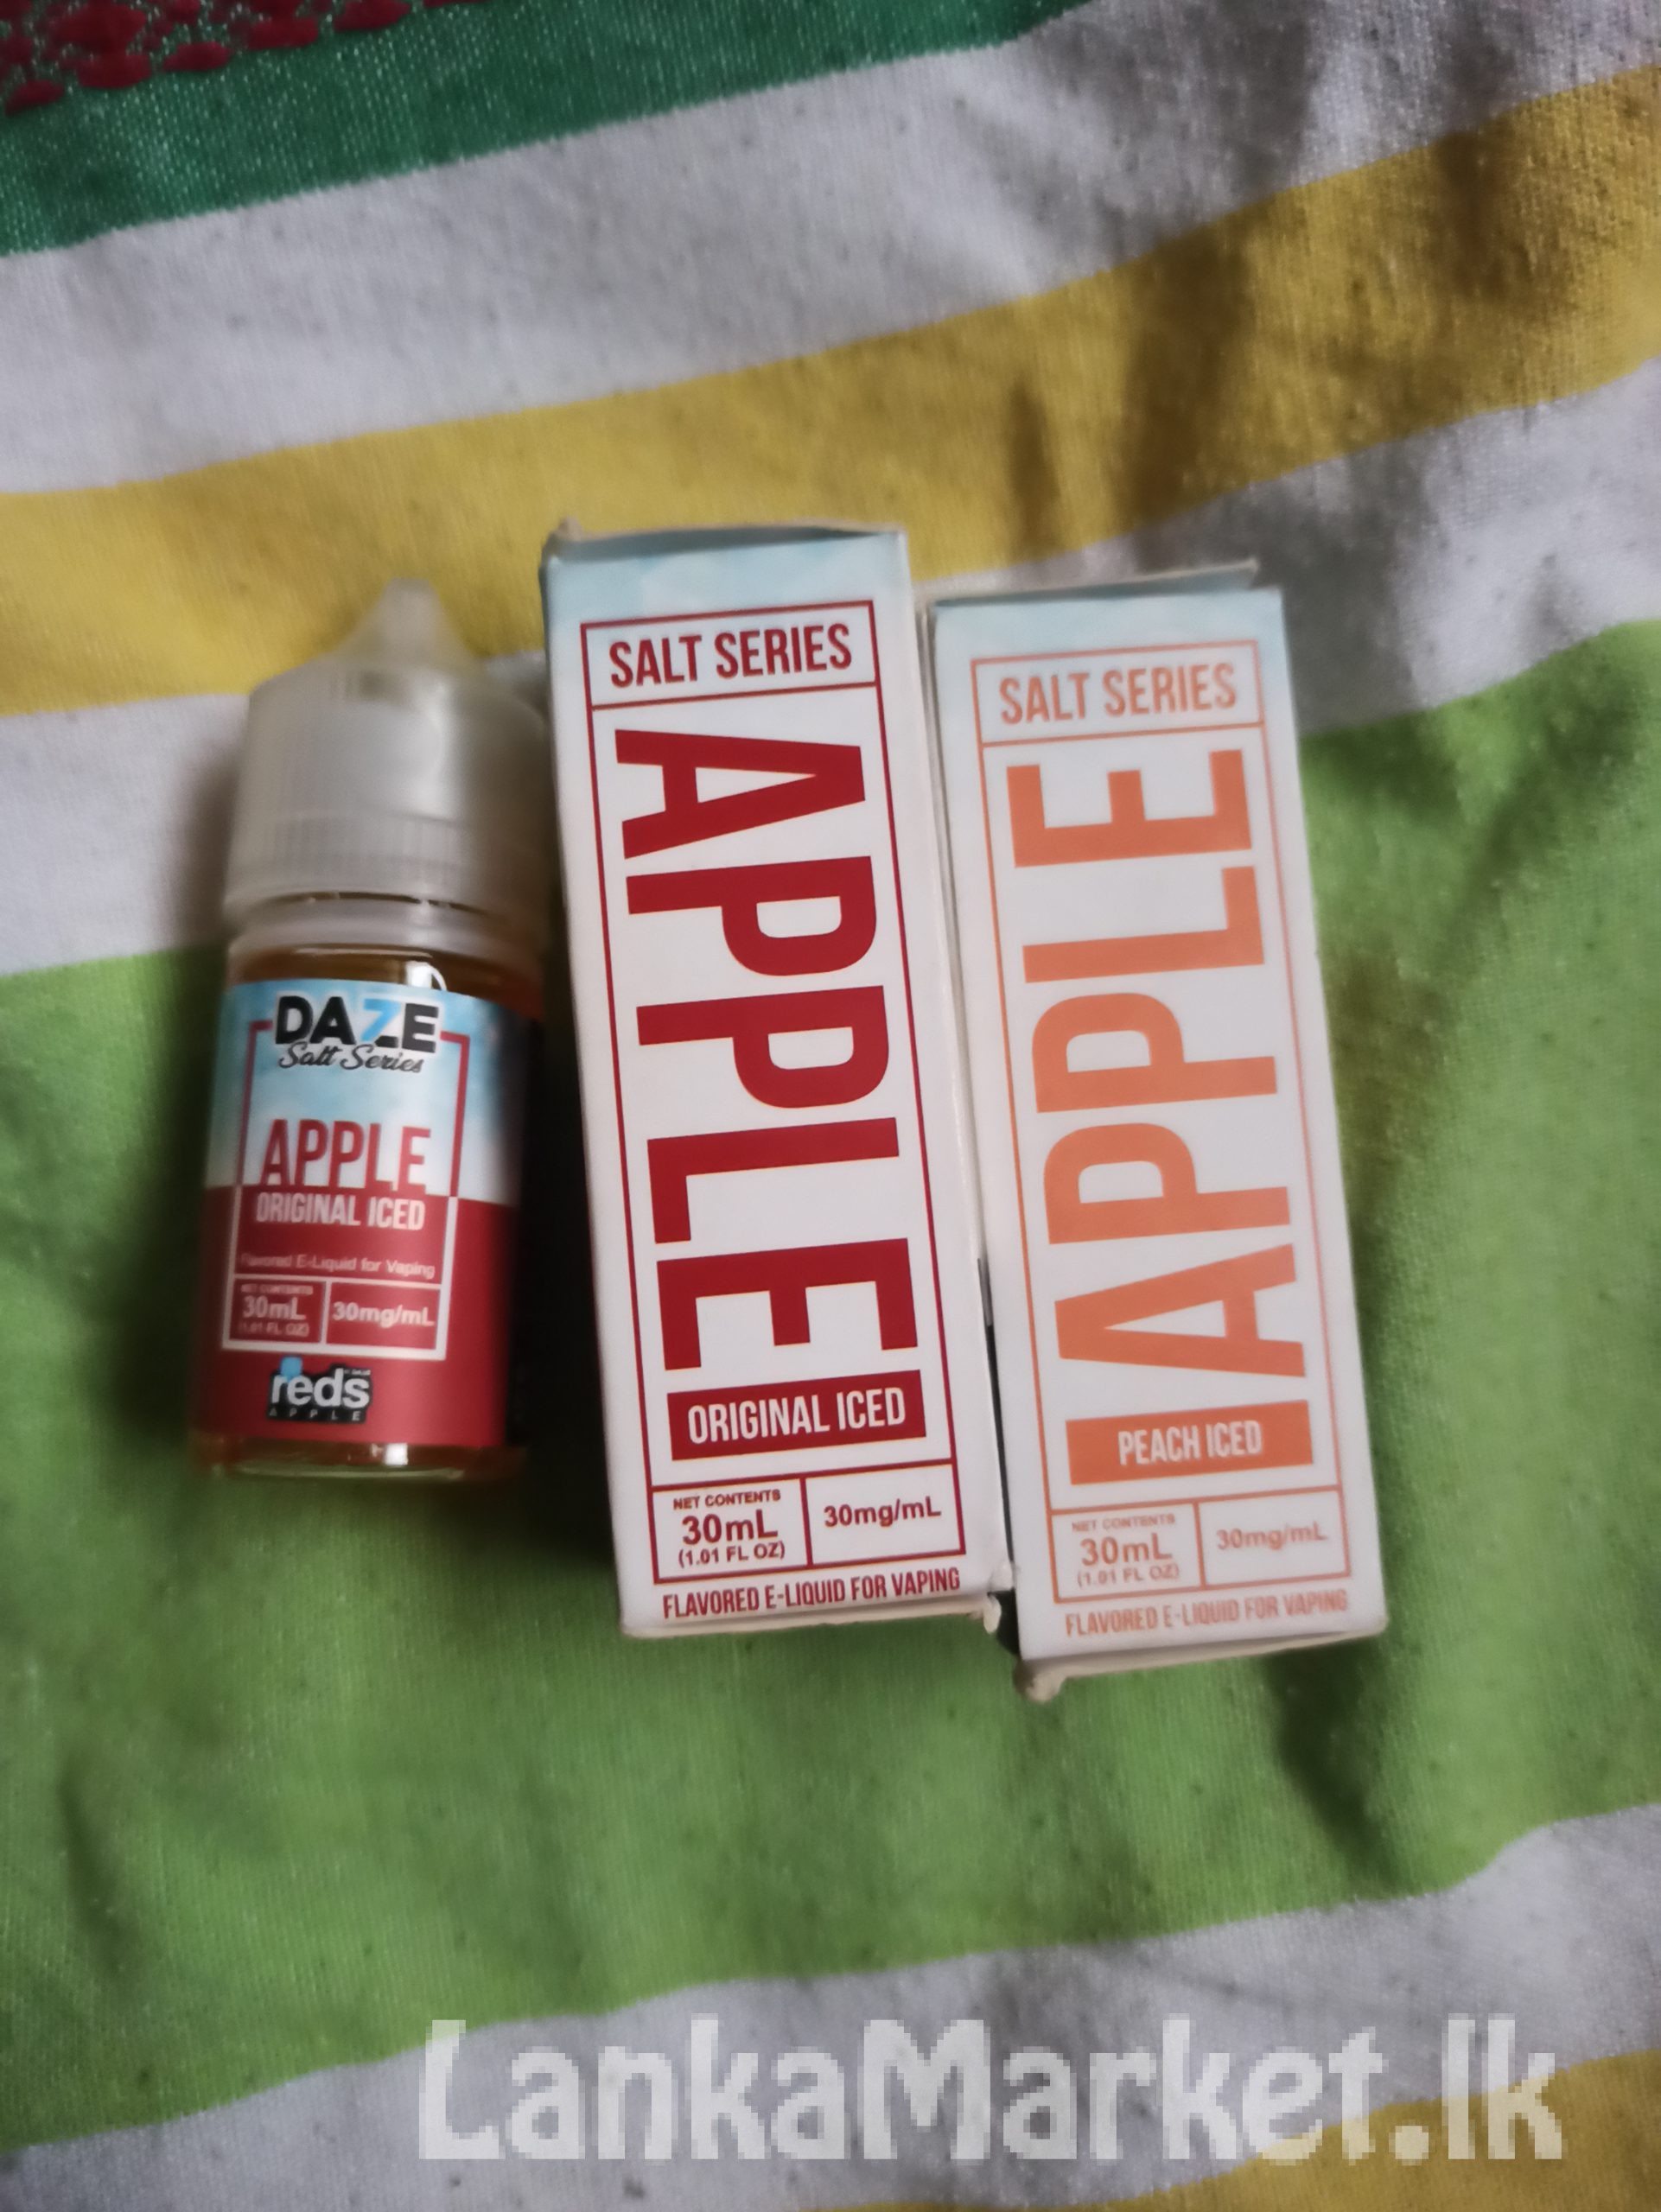 Flavoured E-Liquid For Vaping